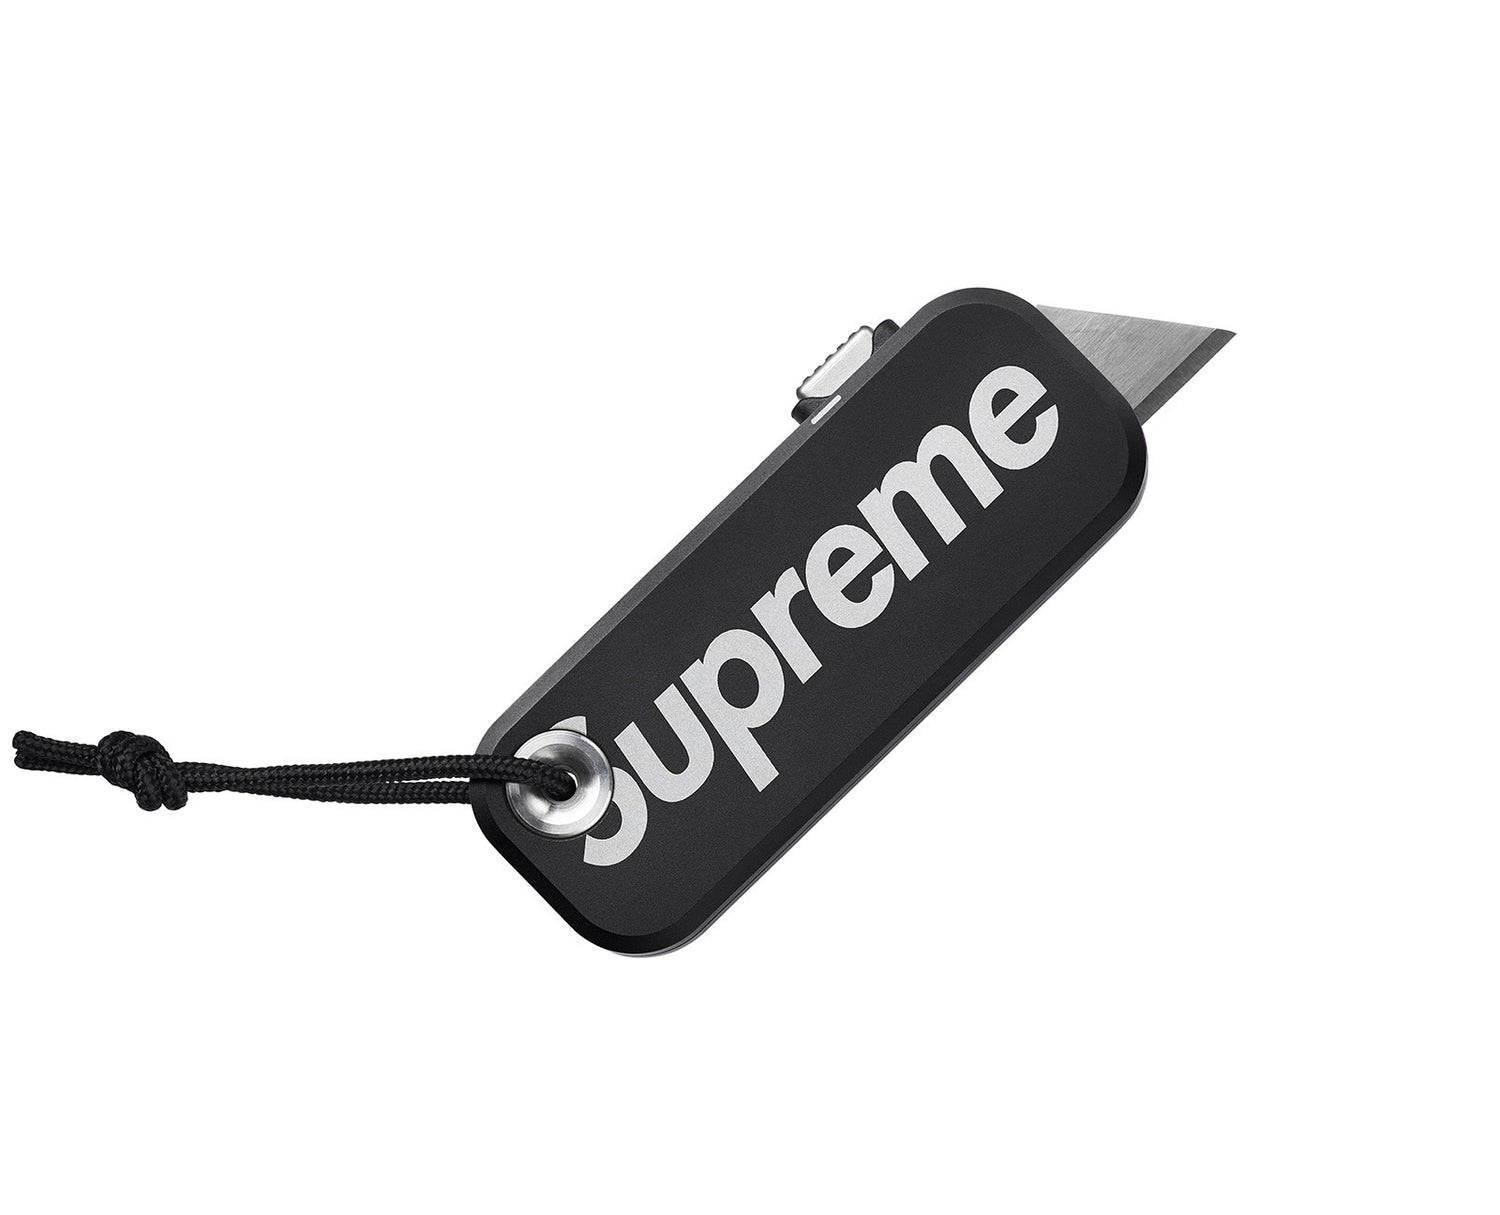 The Palmer Supreme knife with black case.